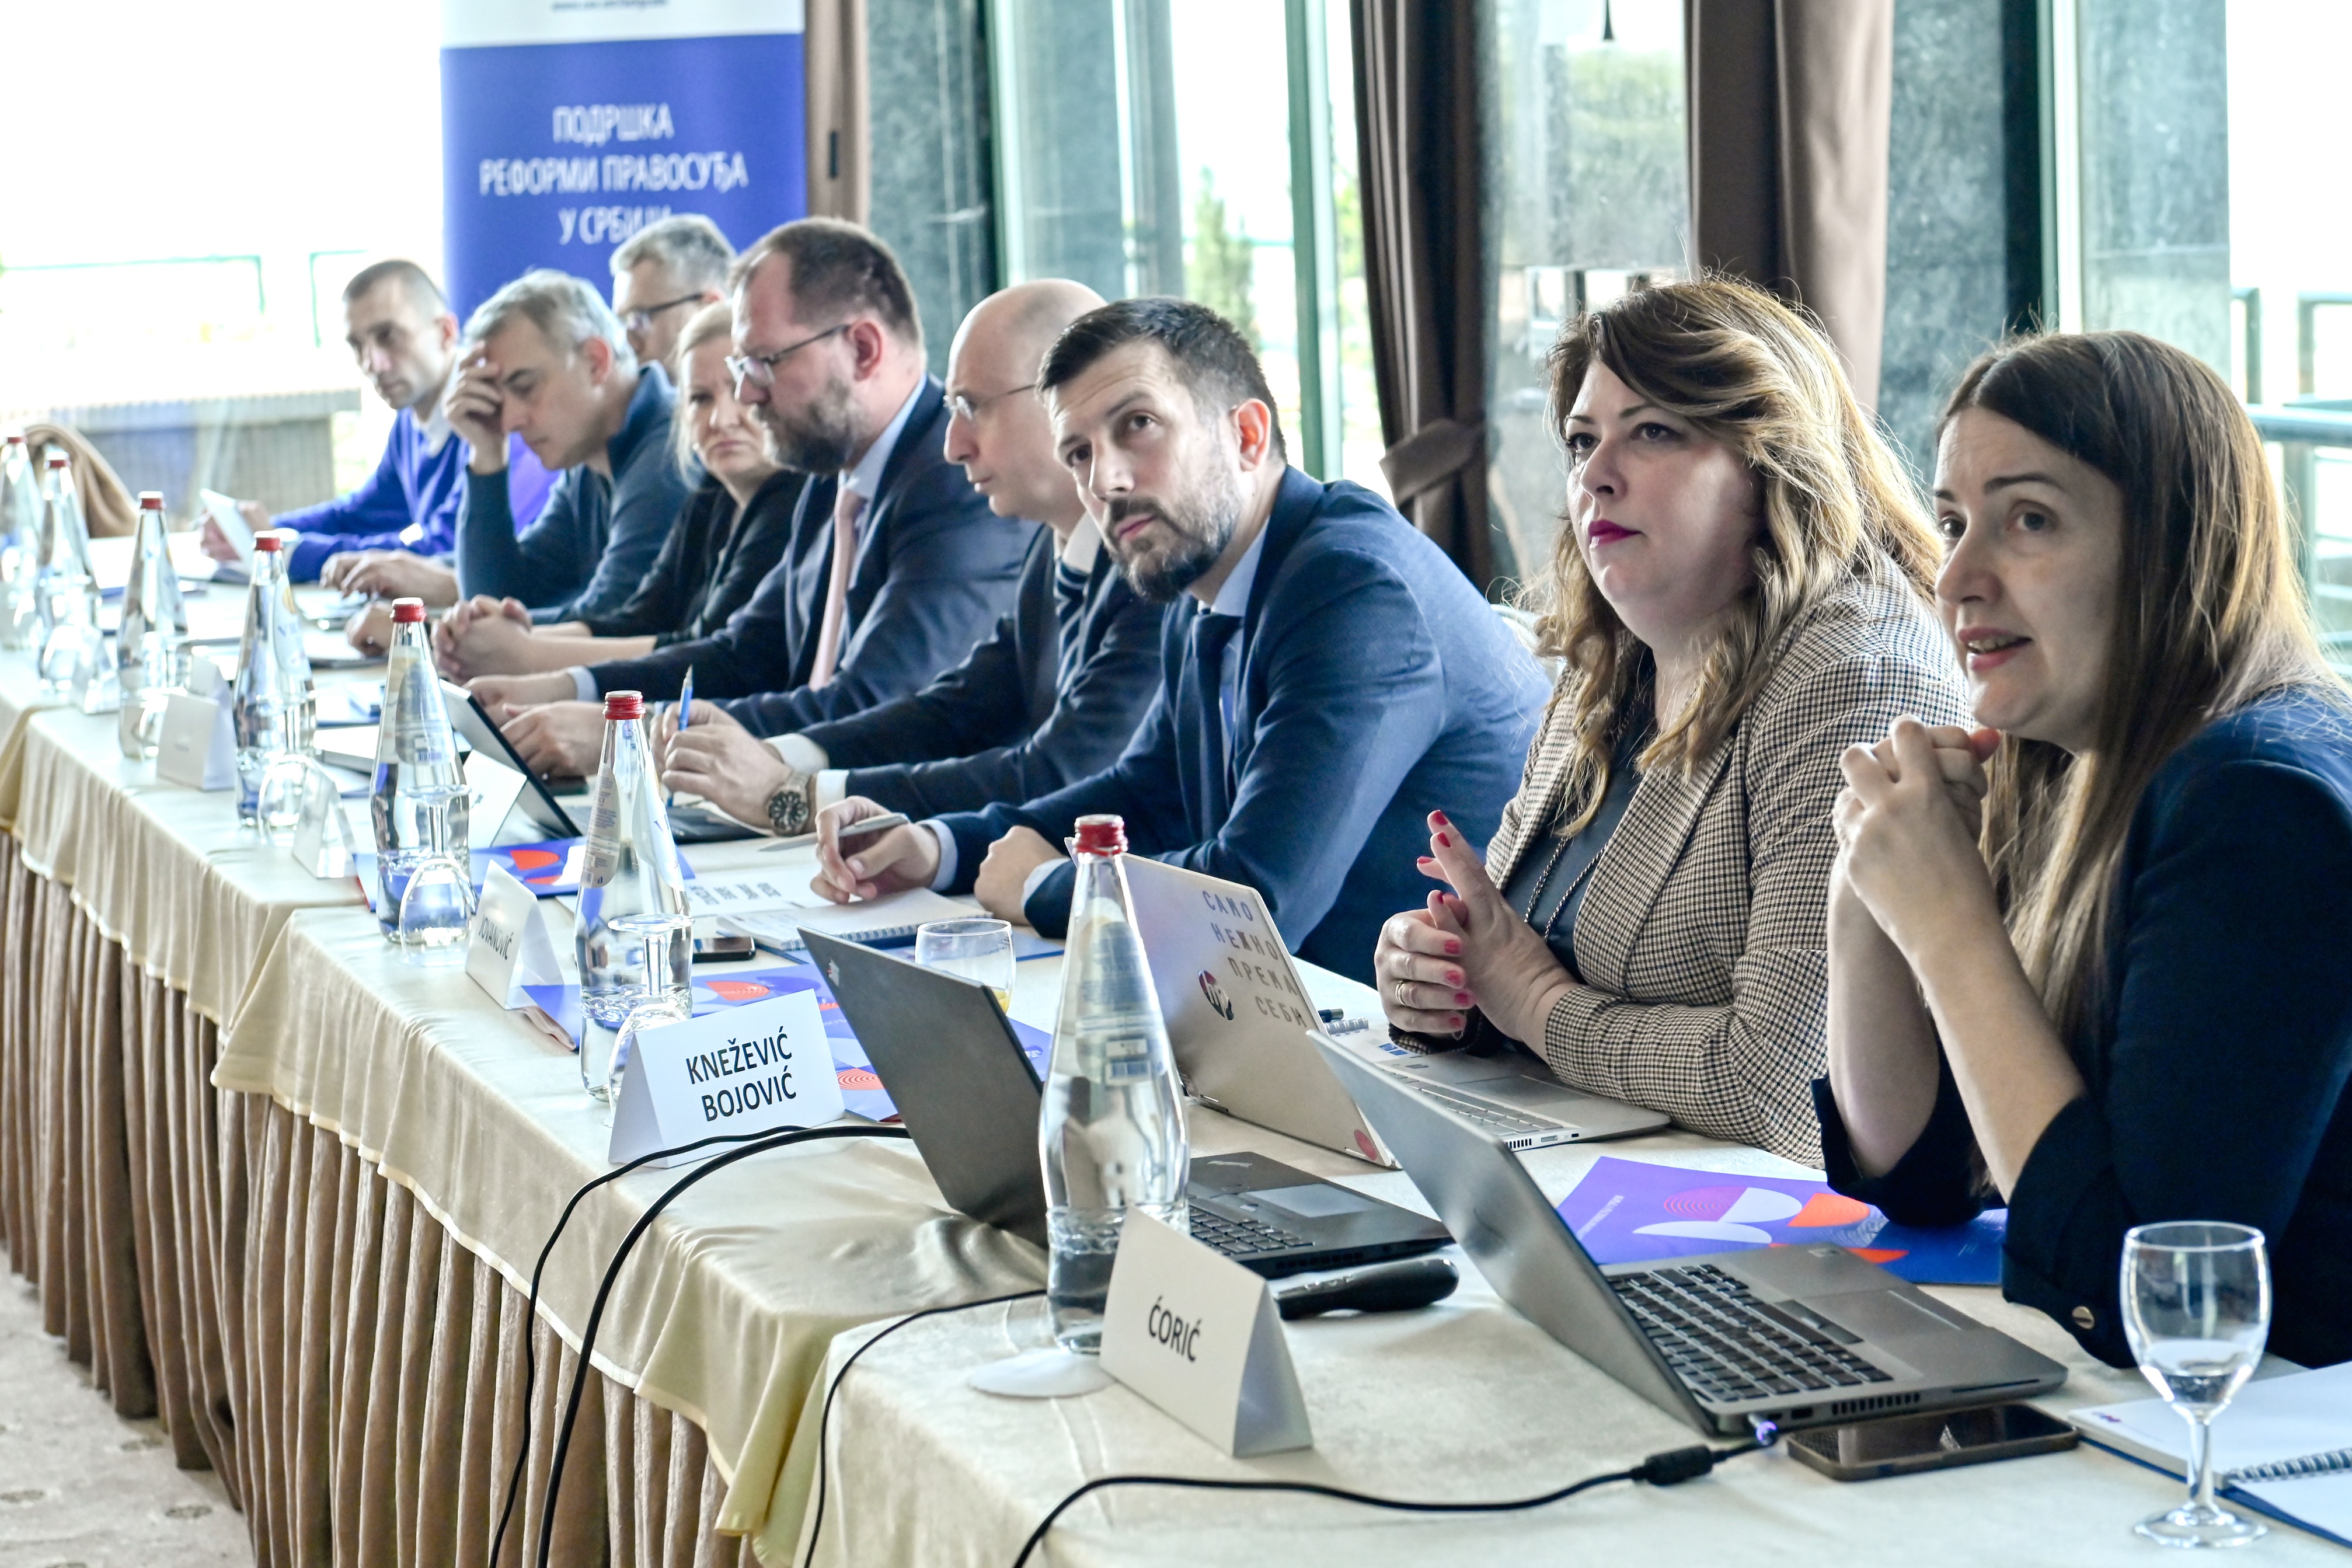 Judicial Academy in Serbia hosted the 2nd meeting of the Working Group for improving the multi-annual work plan as part of reform project supported by the EU and the Council of Europe